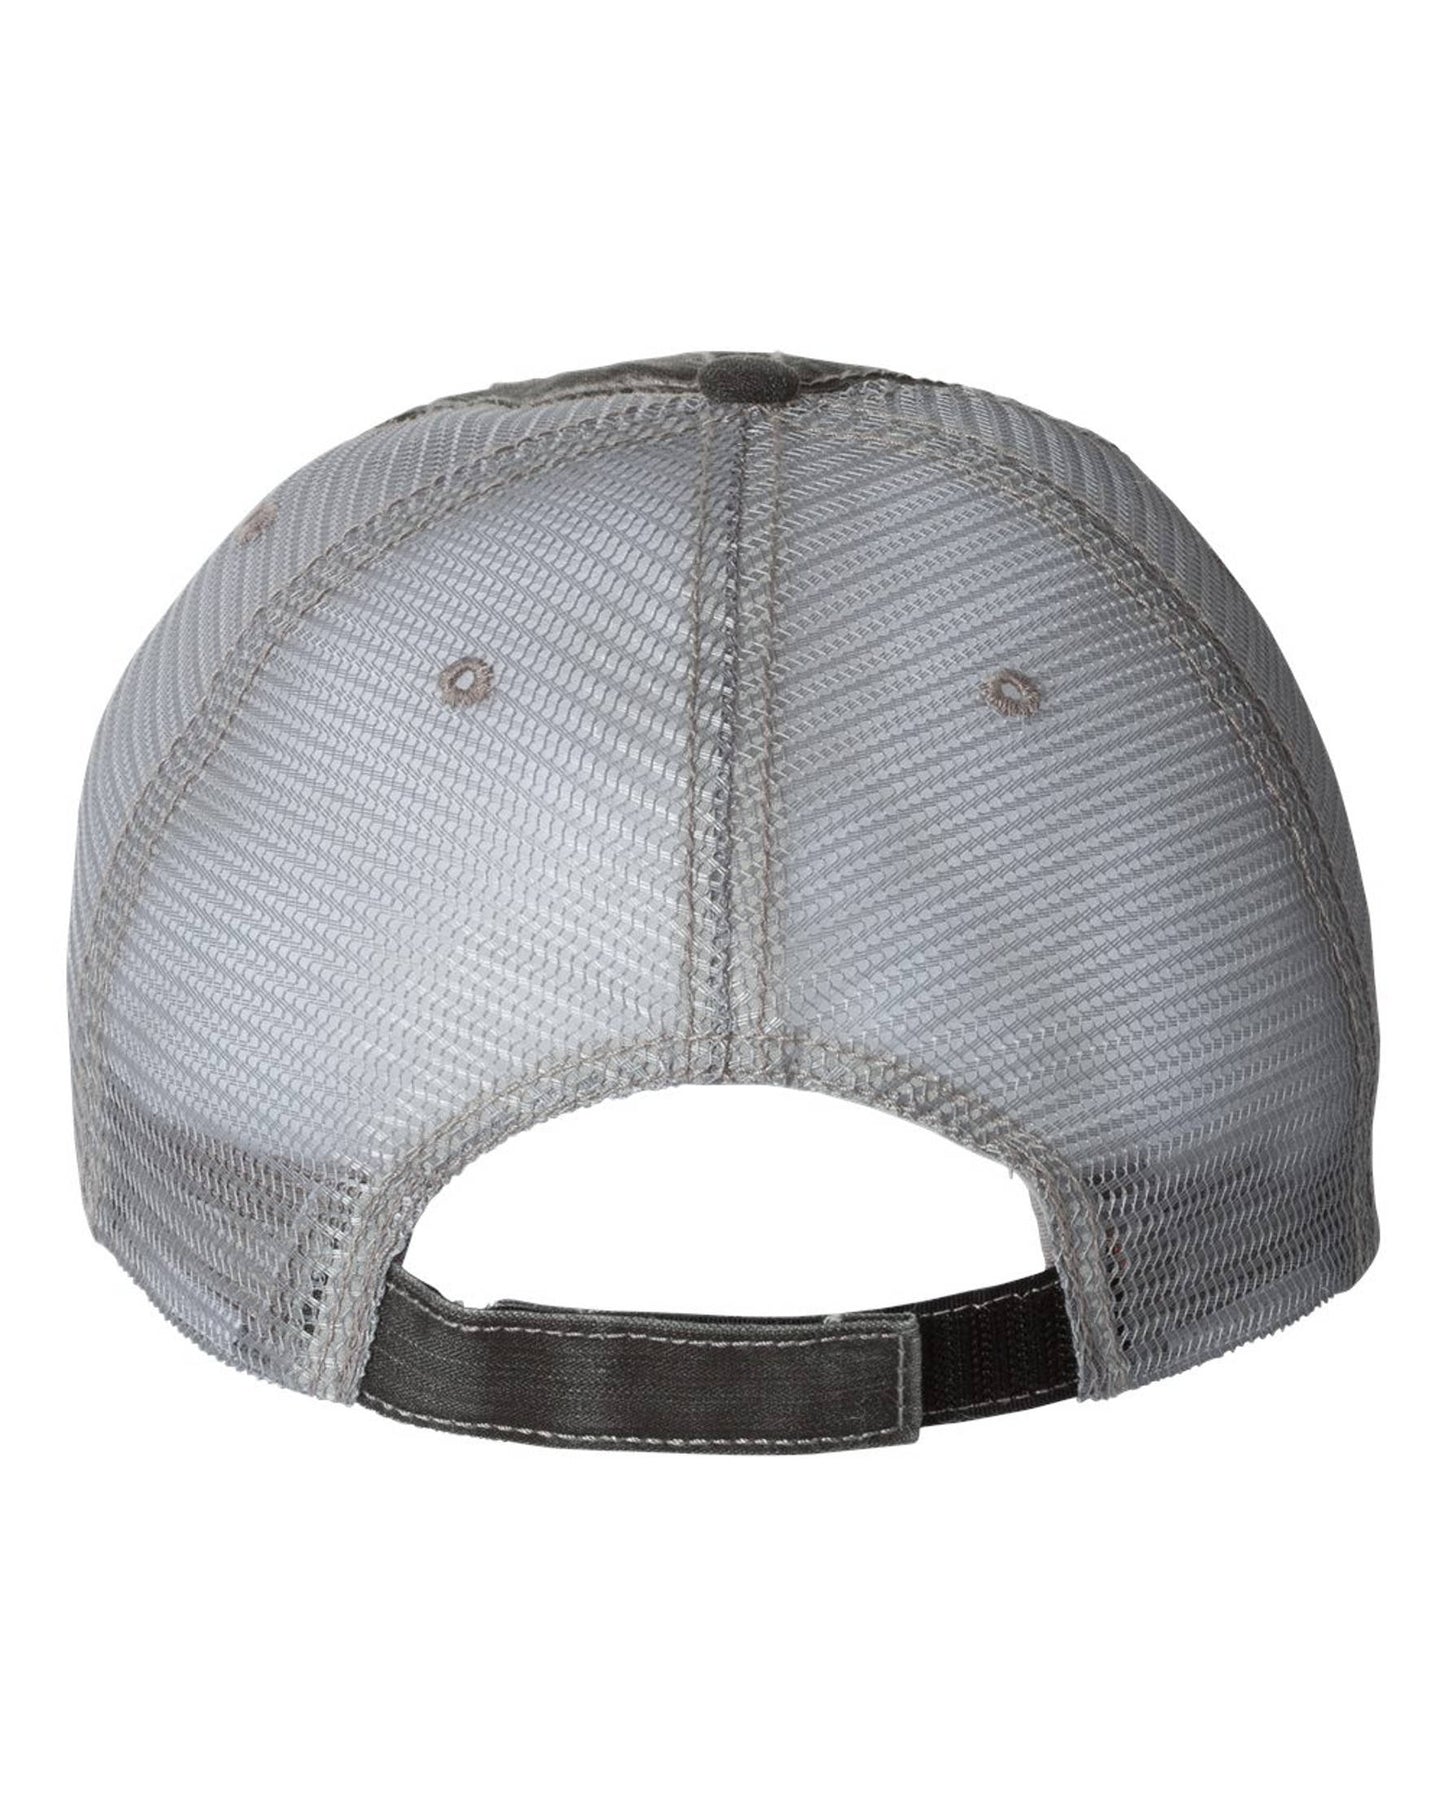 Gray Distressed Trucker Hat - Gray Buffalo Check - All US States